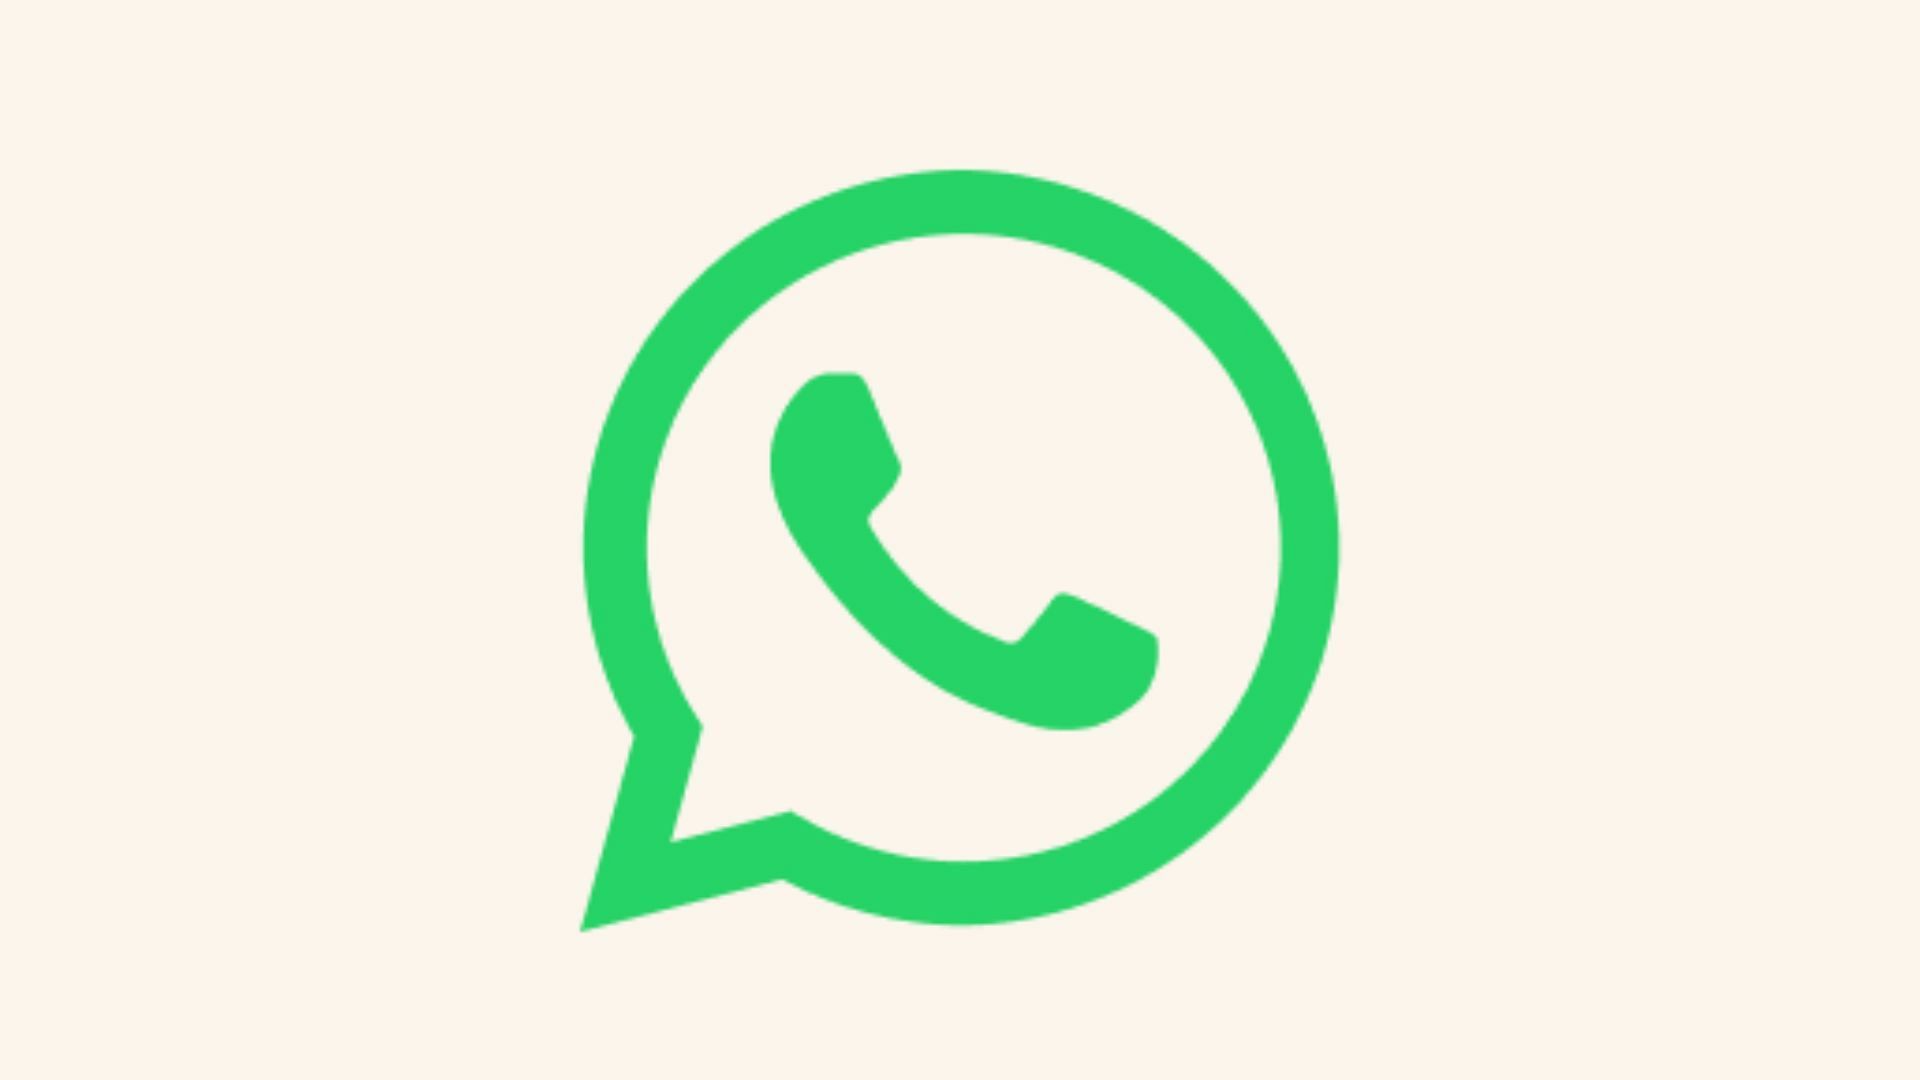 WhatsApp users can now edit messages (Image via WhatsApp)